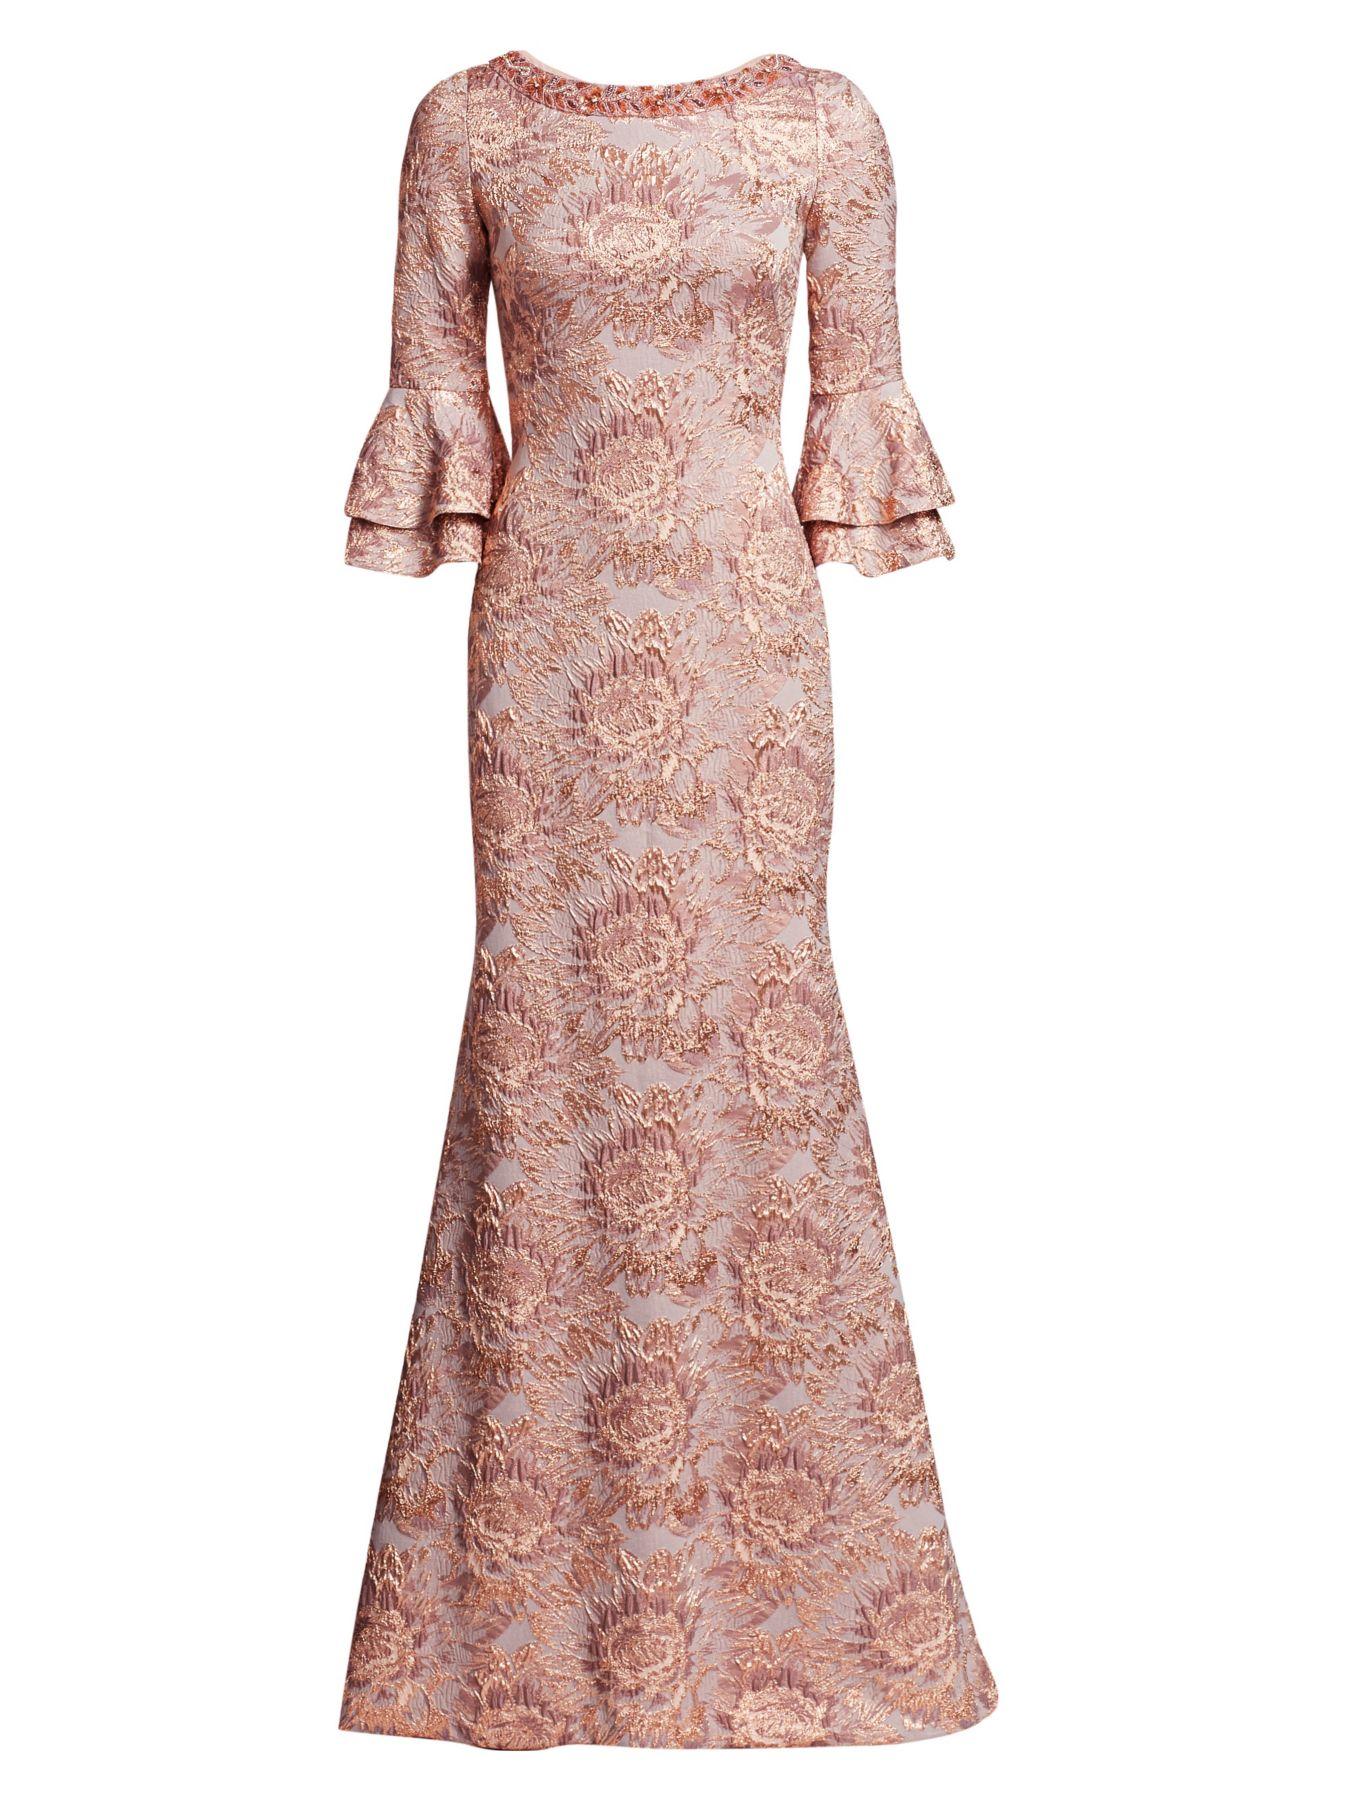 THEIA Metallic Floral Jacquard Bell-sleeve Trumpet Gown in Antique Rose ...